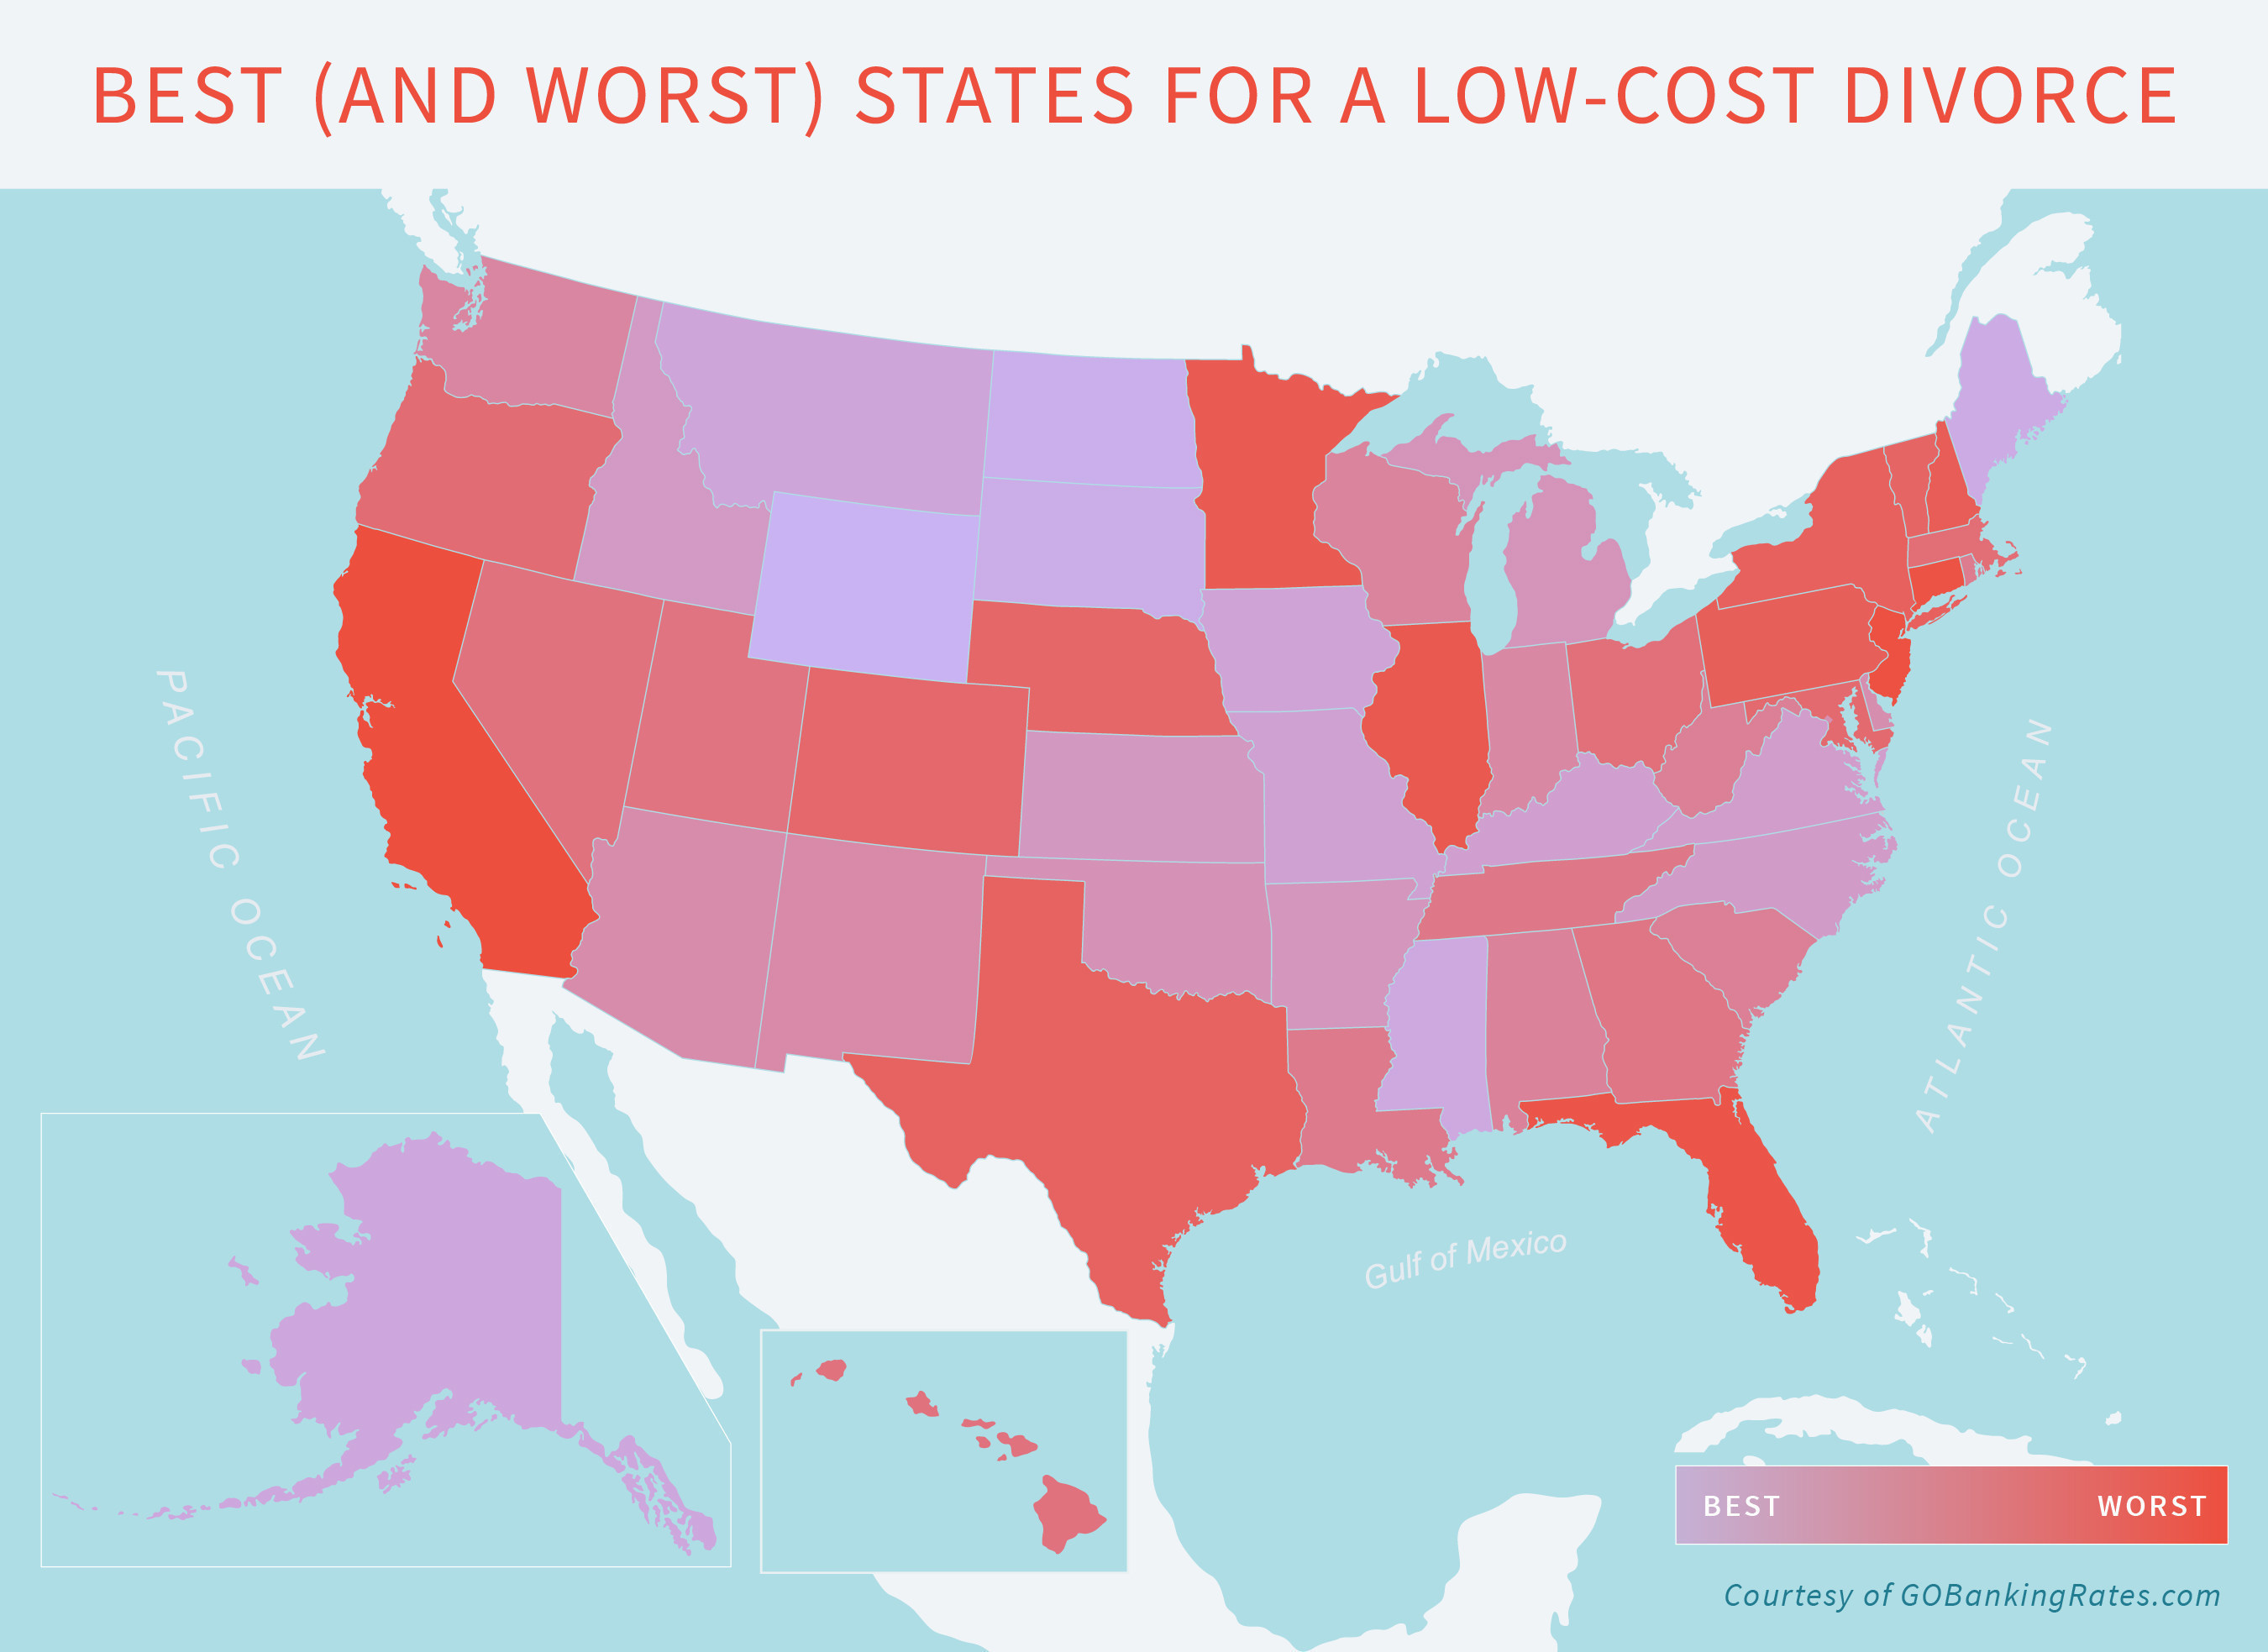 GOBankingRates study finds Wyoming is the best state to get a low-cost divorce while California is the worst